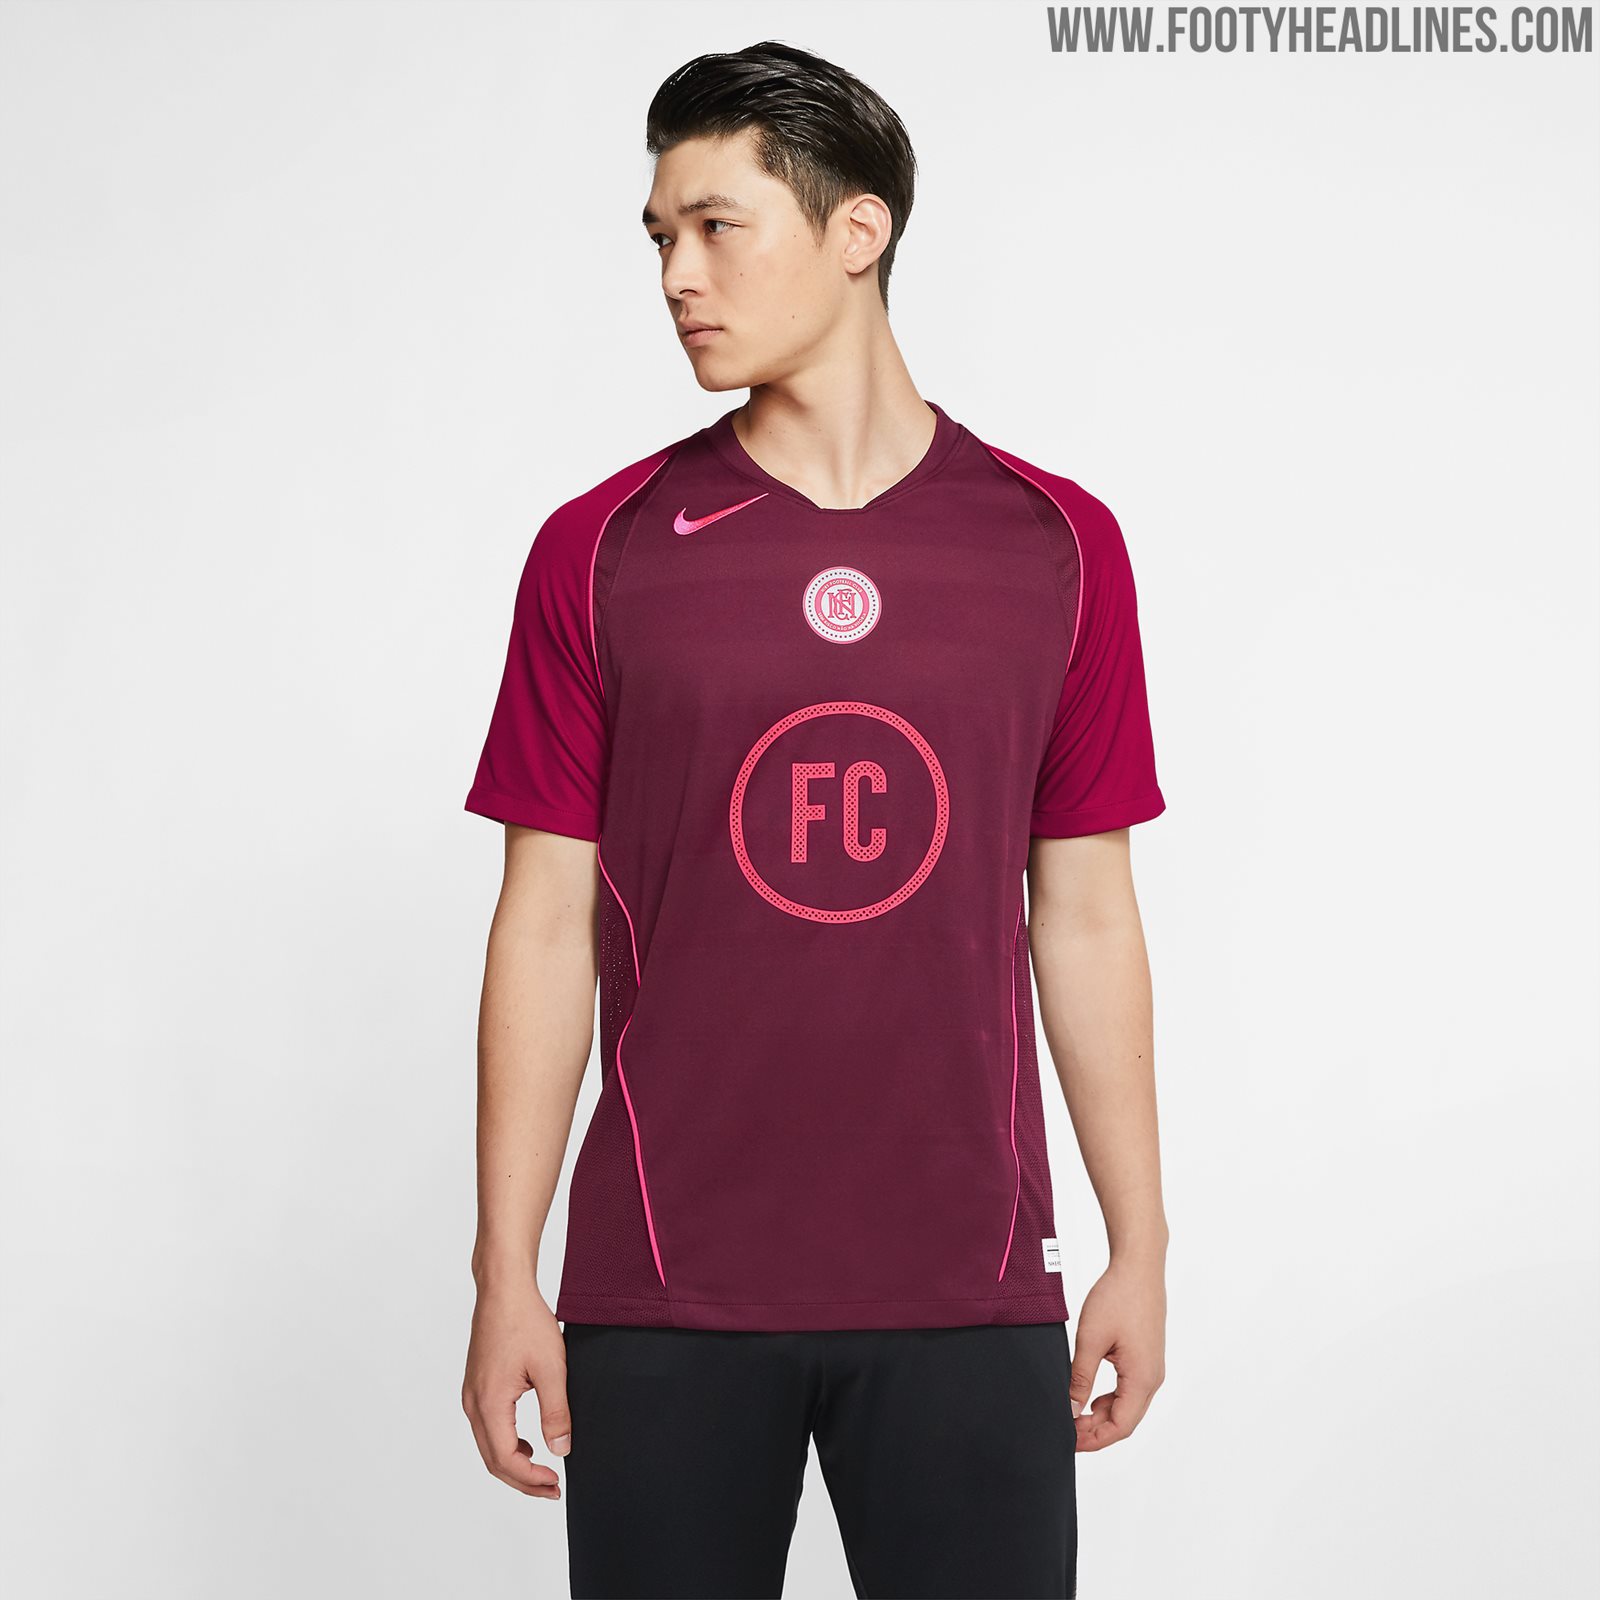 Amazing - 2 Modern, Classic Total 90 Inspired Nike FC Jerseys Released ...